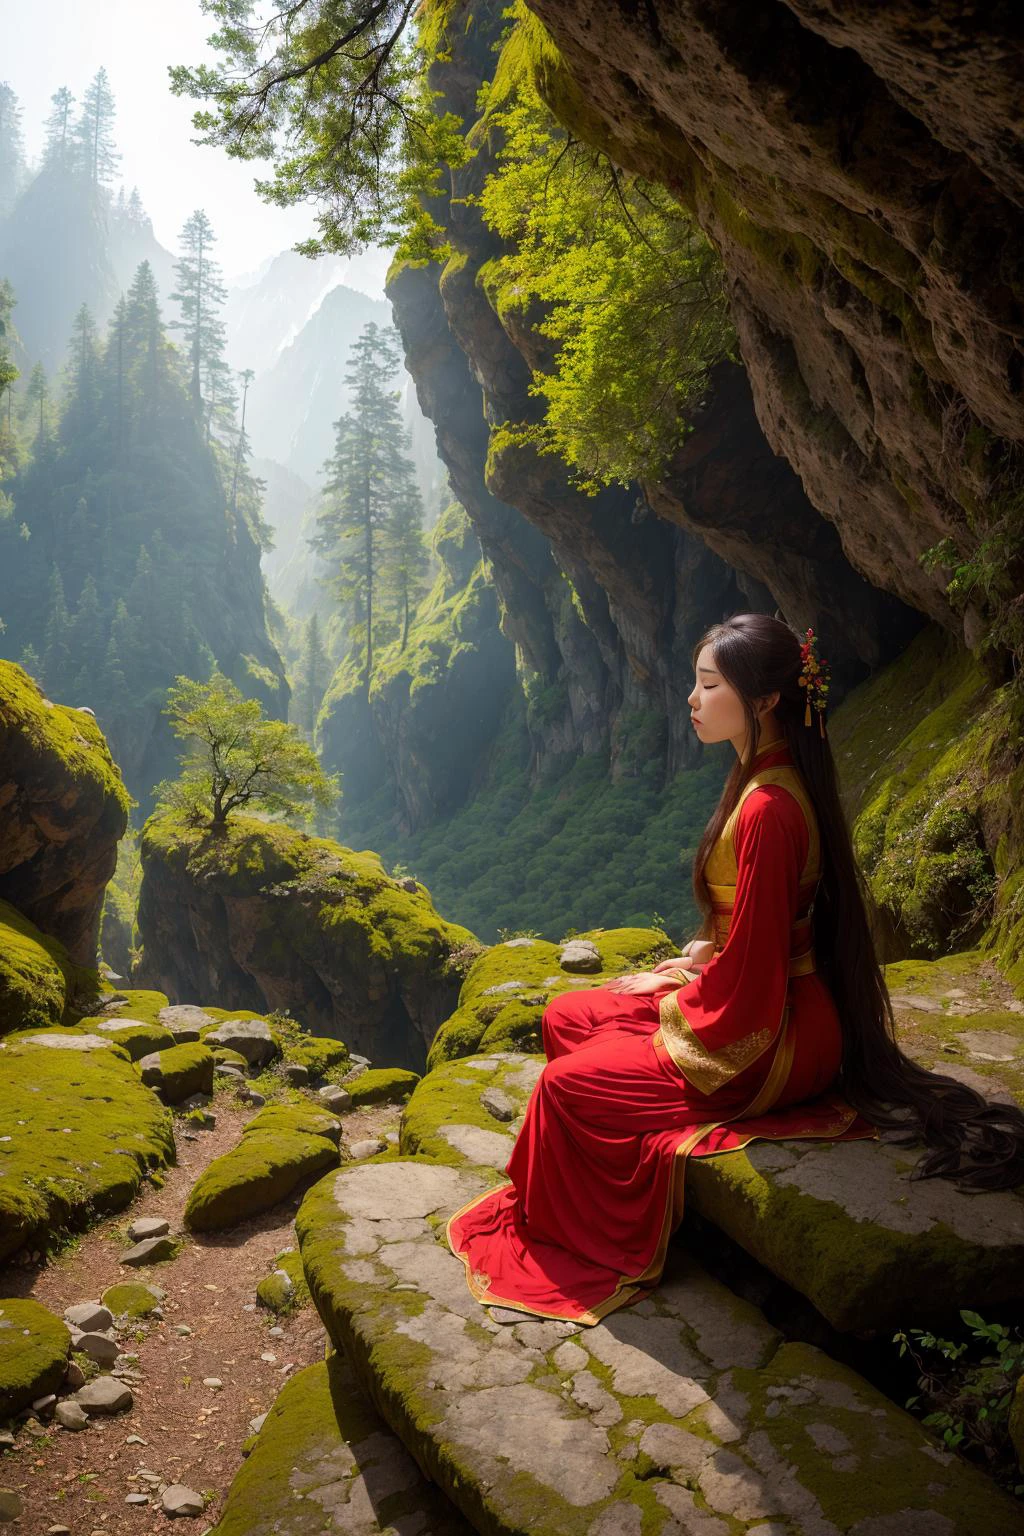 On a morning in a mountain cave, a Beautiful hanfu girl pauses at the edge of a cliff. The sun shines down from the mountain top, casting a soft glow inside the cave. The walls are covered in moss, and the ground is covered in pine needles and small stones. In the distance, mountain peaks and forests are faintly visible through the hazy morning mist. This is a tranquil and serene scene,red theme,
 hdr, (photorealism, masterpiece quality, best quality),